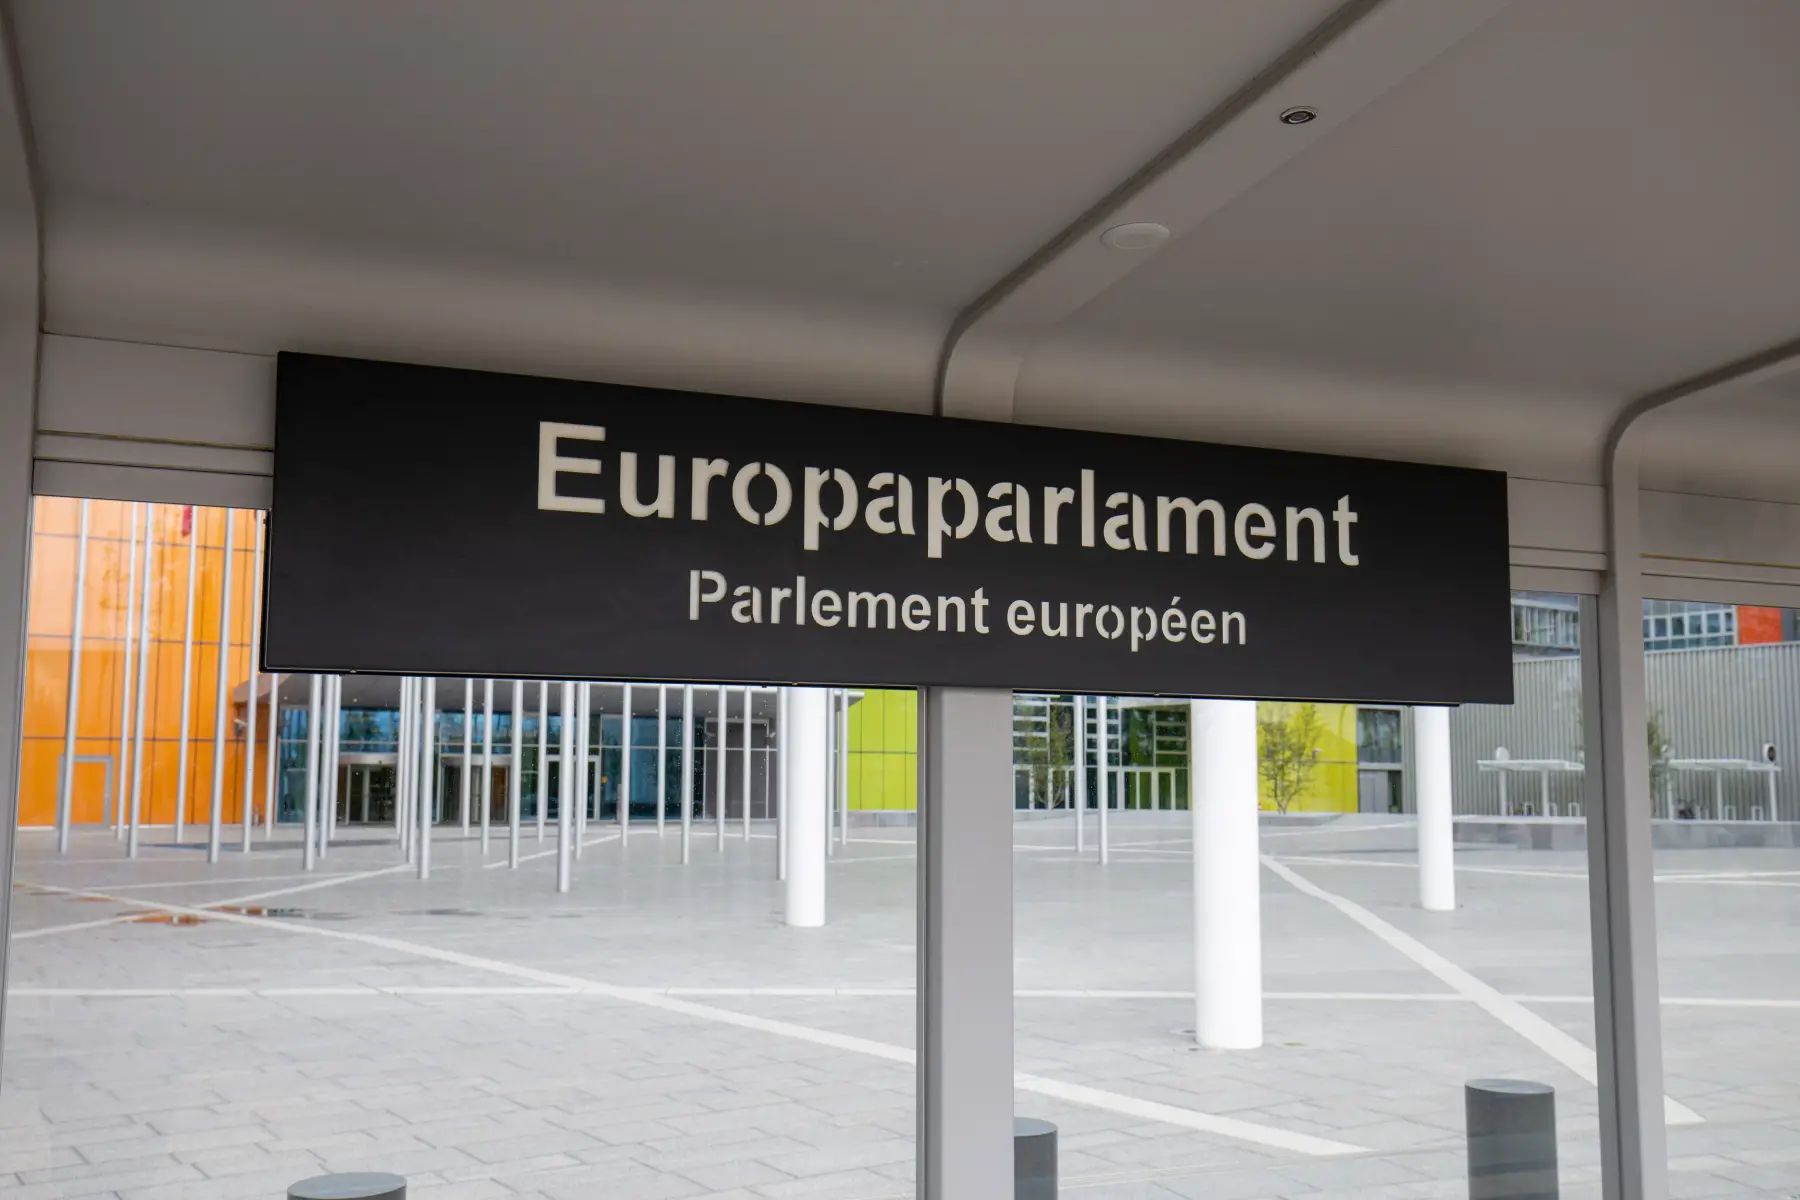 Train station 'Europaparlament' sign in Luxembourg